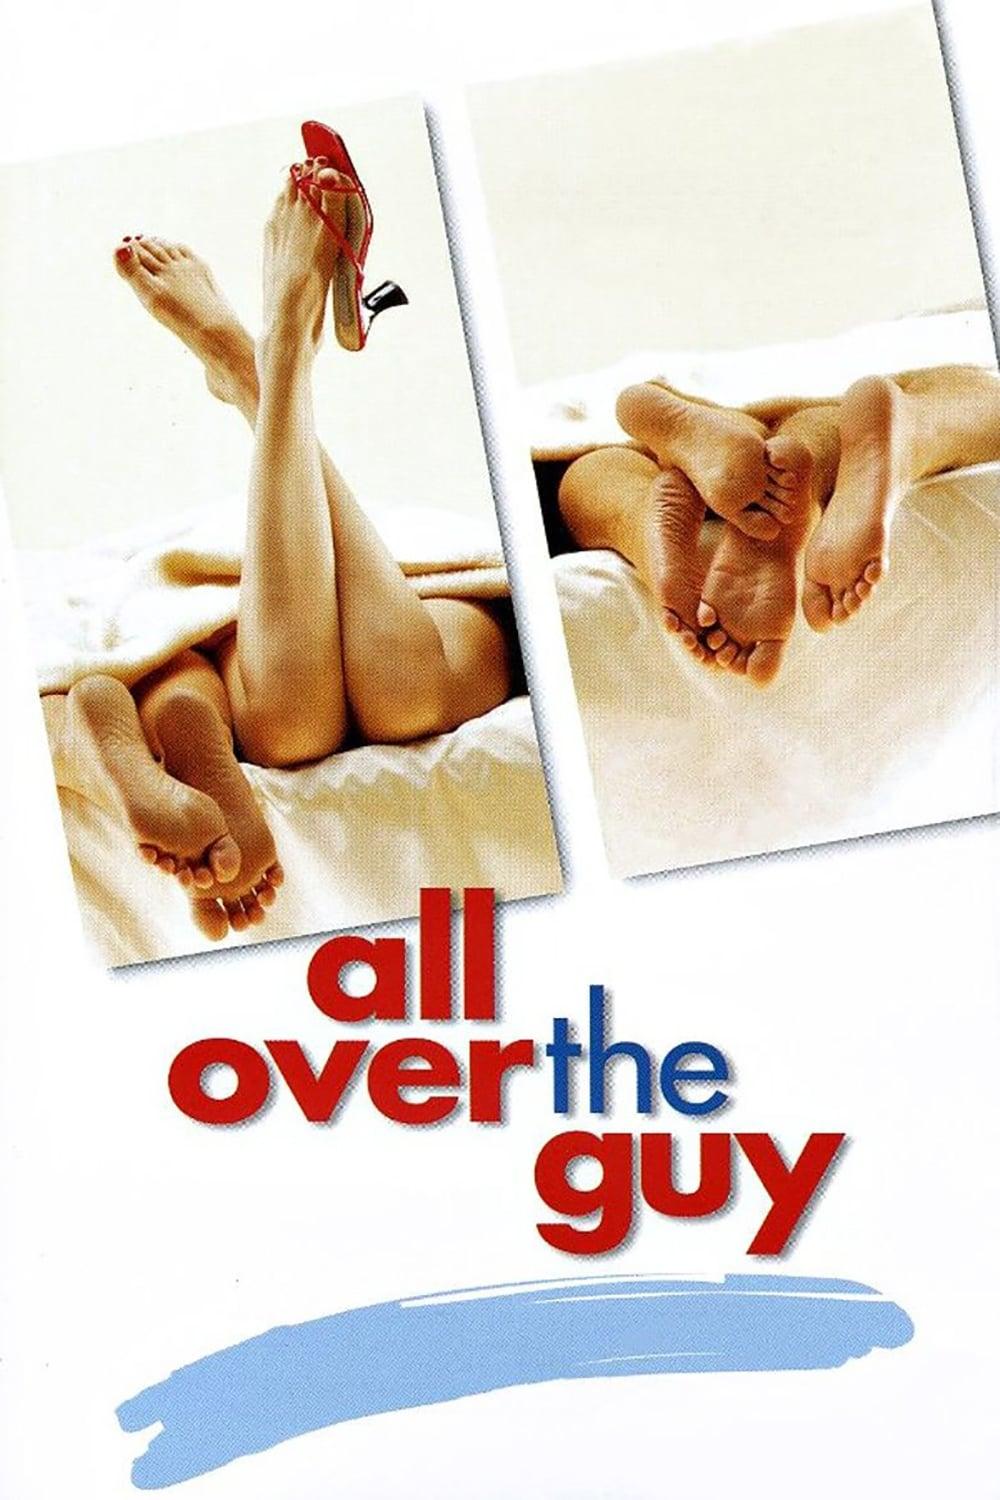 All Over the Guy poster